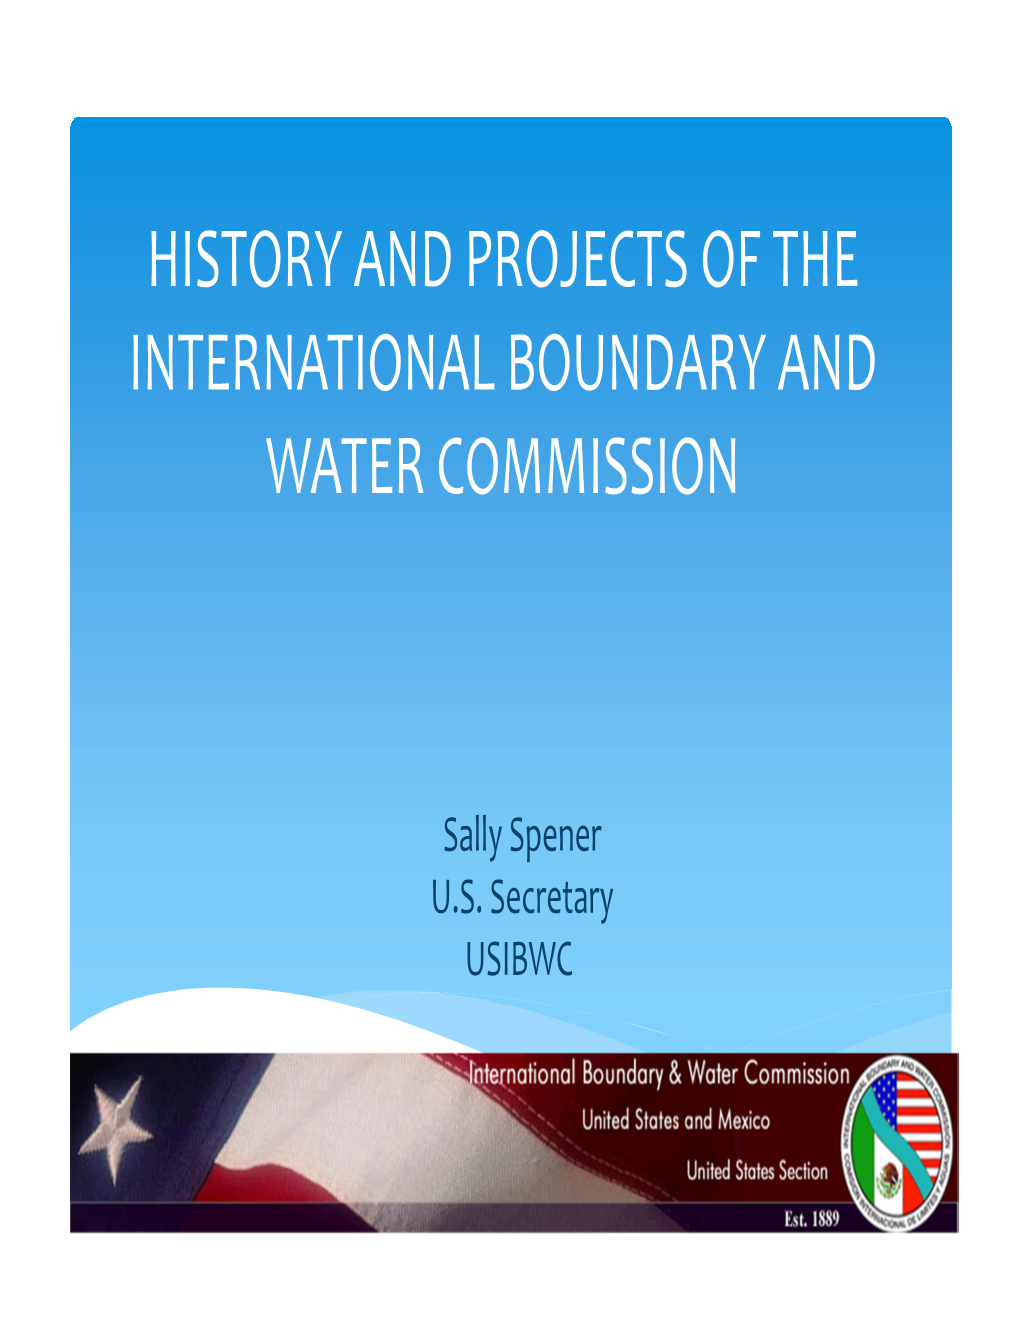 History and Projects of the International Boundary and Water Commission